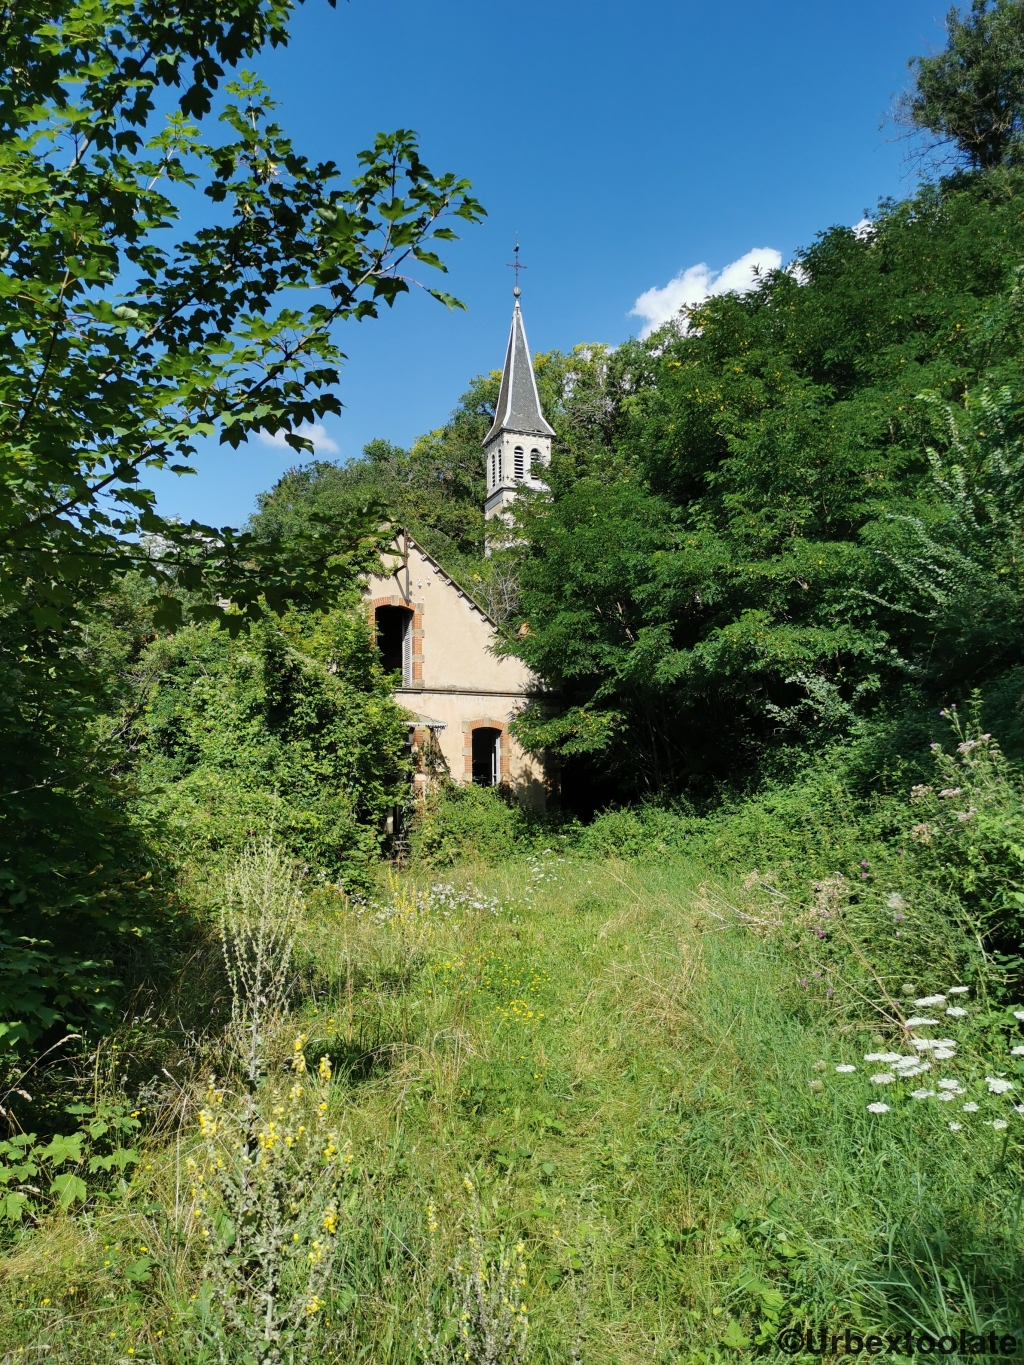 The Lost Chapel